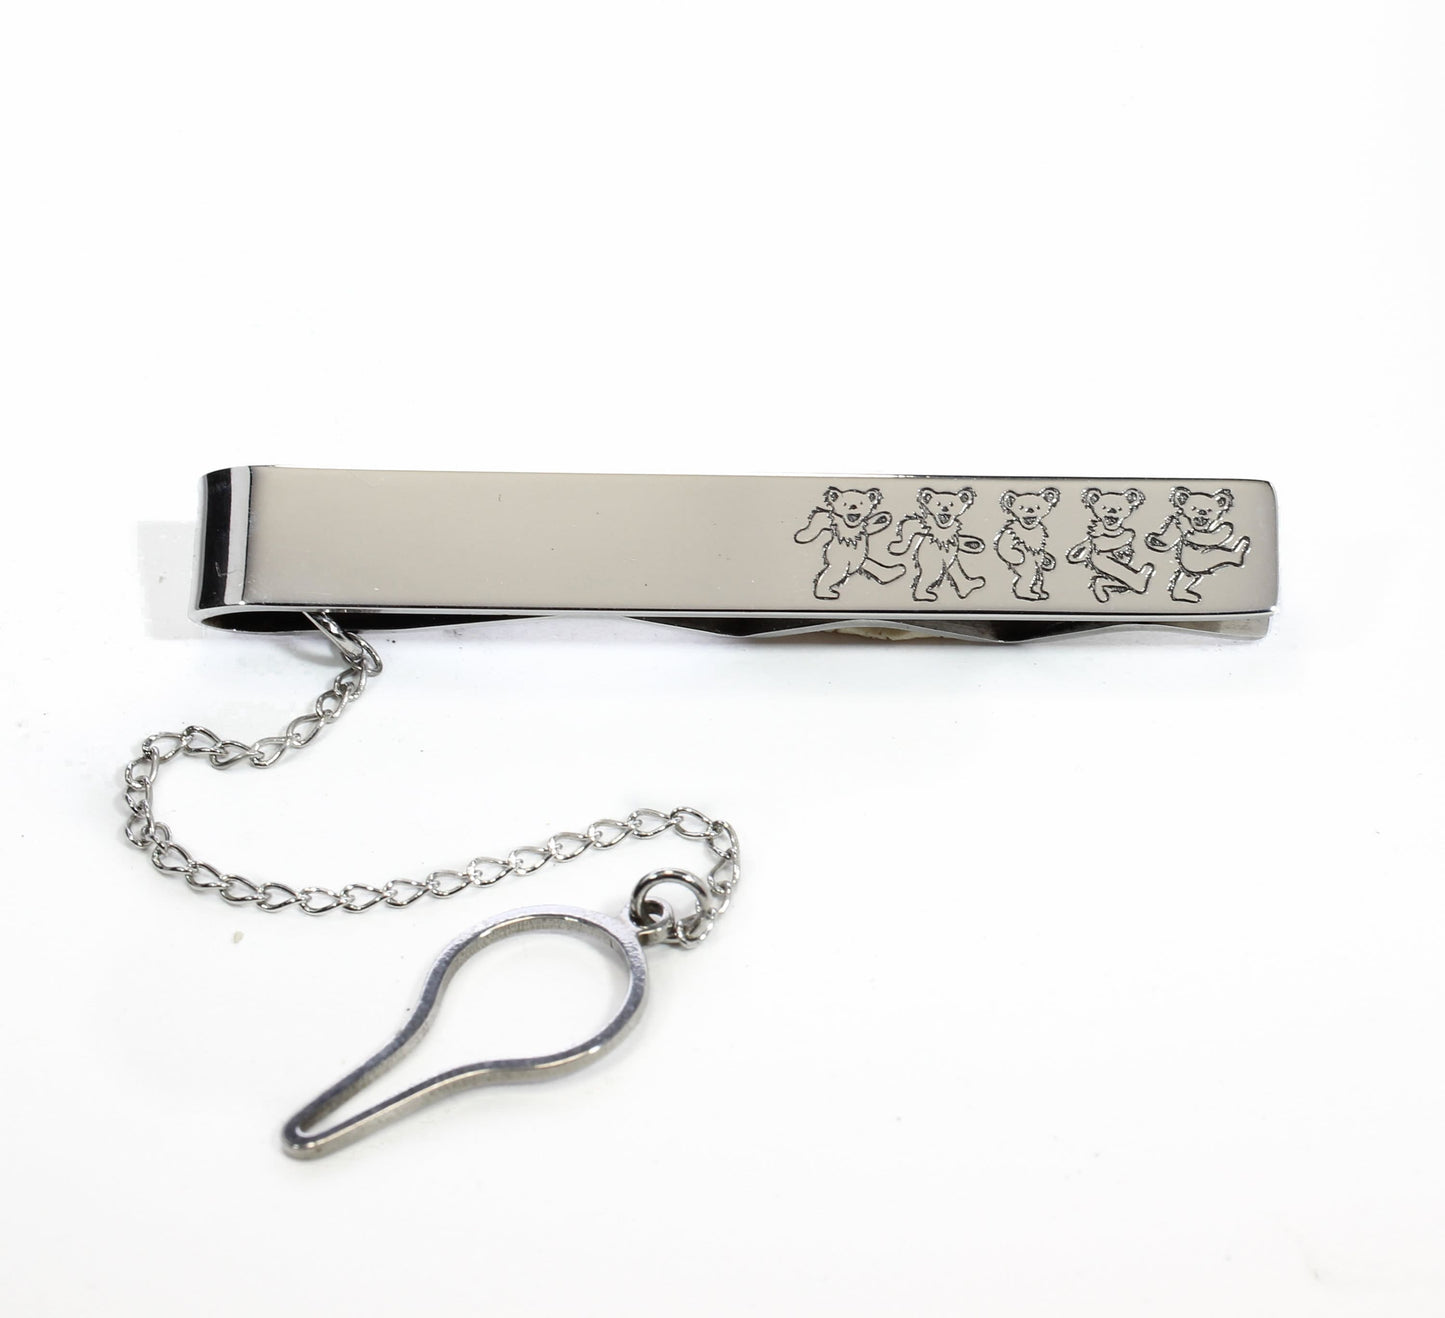 Custom Tie Clip with Chain // Groomsmen Tie Clip // Personalized Father's Day Gift // Stainless Steel Tie Bar